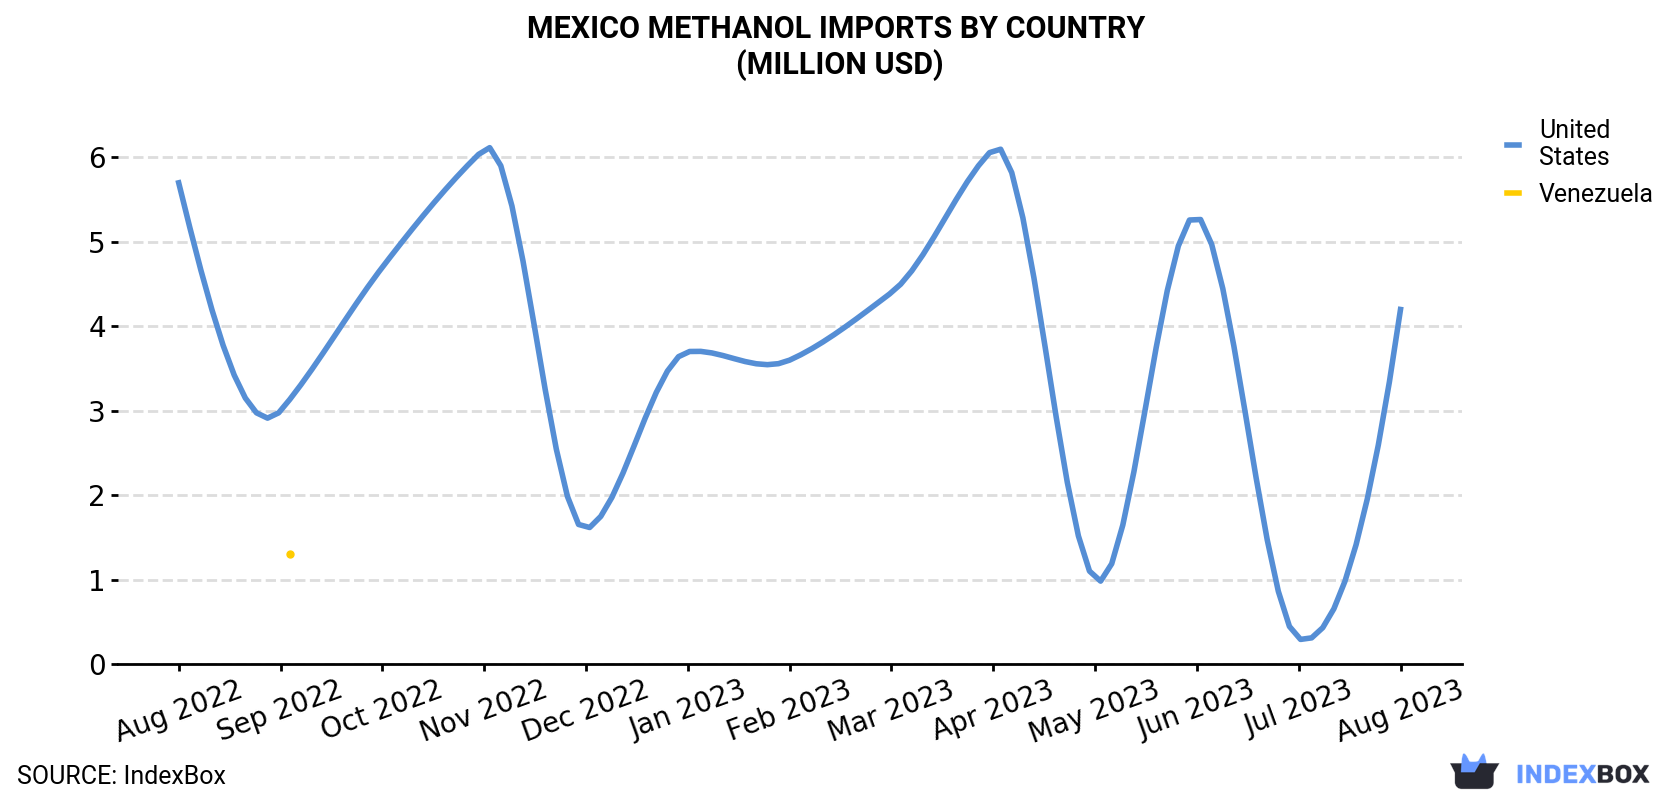 Mexico Methanol Imports By Country (Million USD)